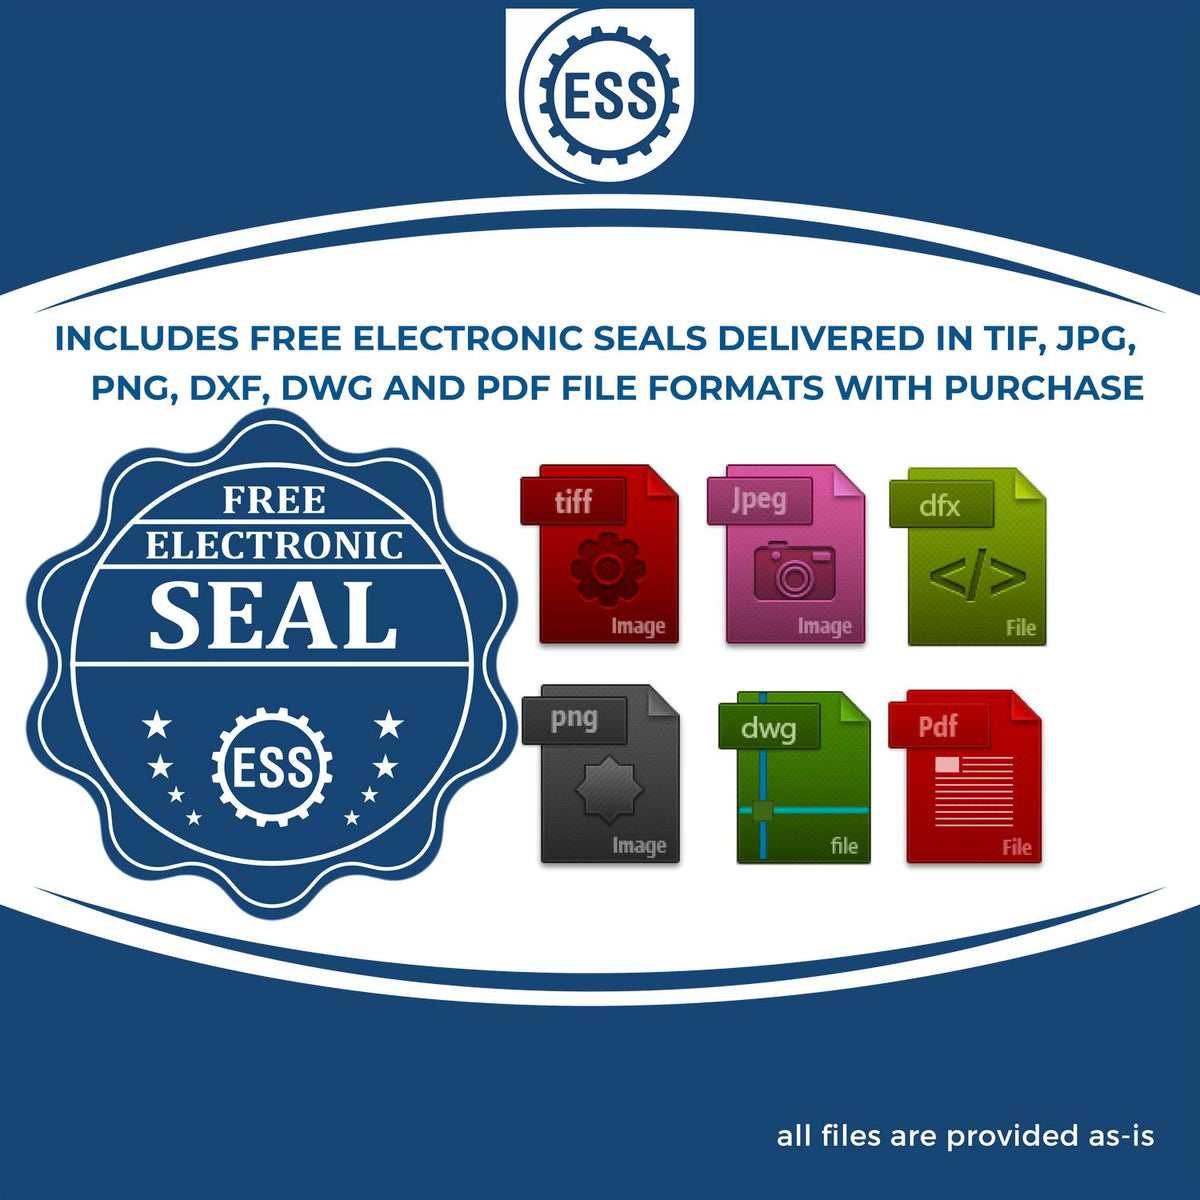 An infographic for the free electronic seal for the Hybrid District of Columbia Geologist Seal illustrating the different file type icons such as DXF, DWG, TIF, JPG and PNG.